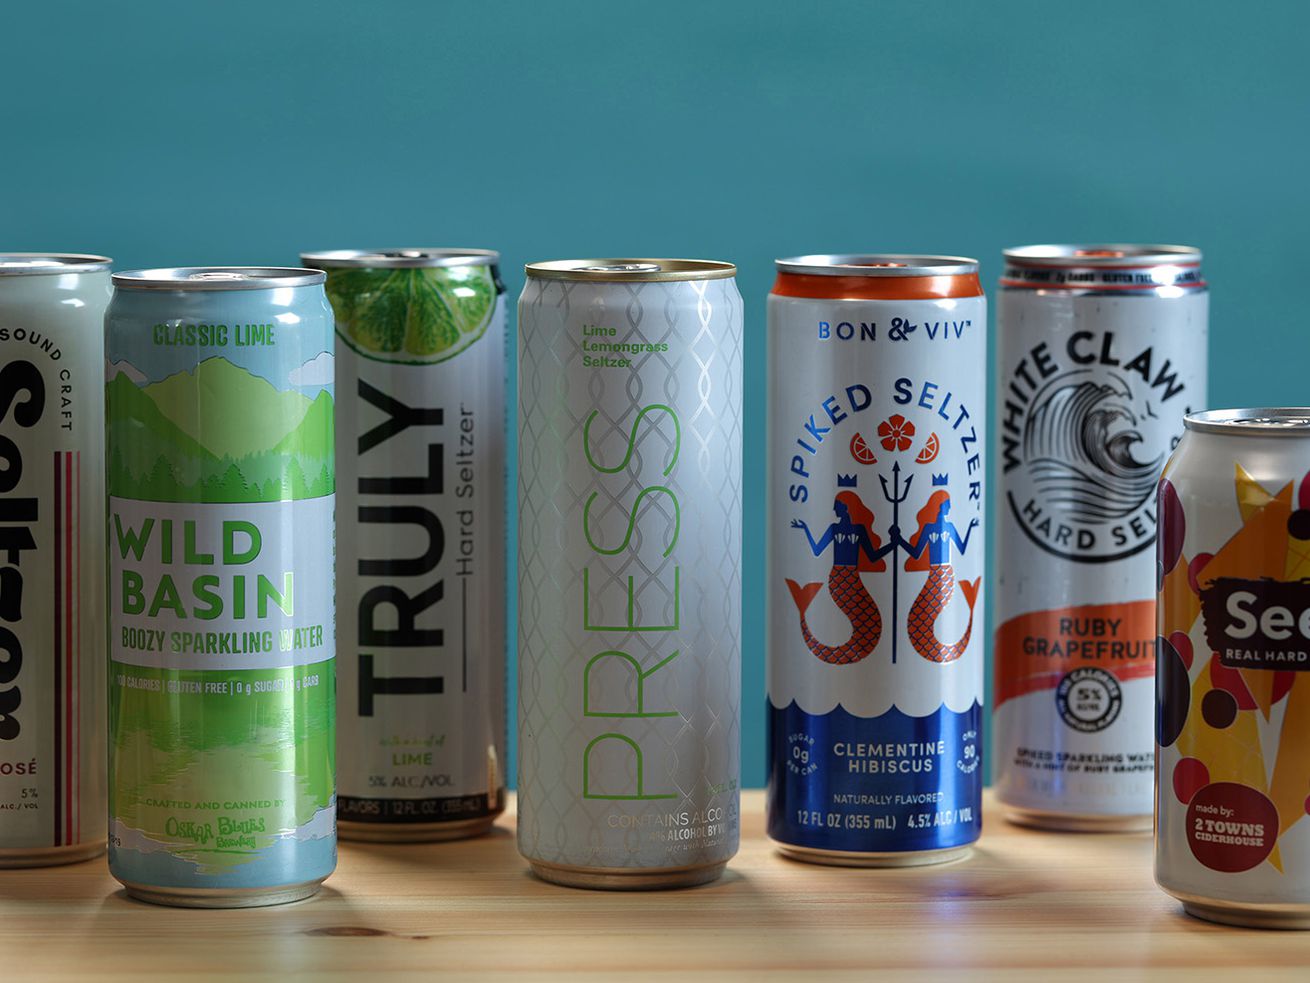 A row of cans of hard seltzer placed on a wooden countertop